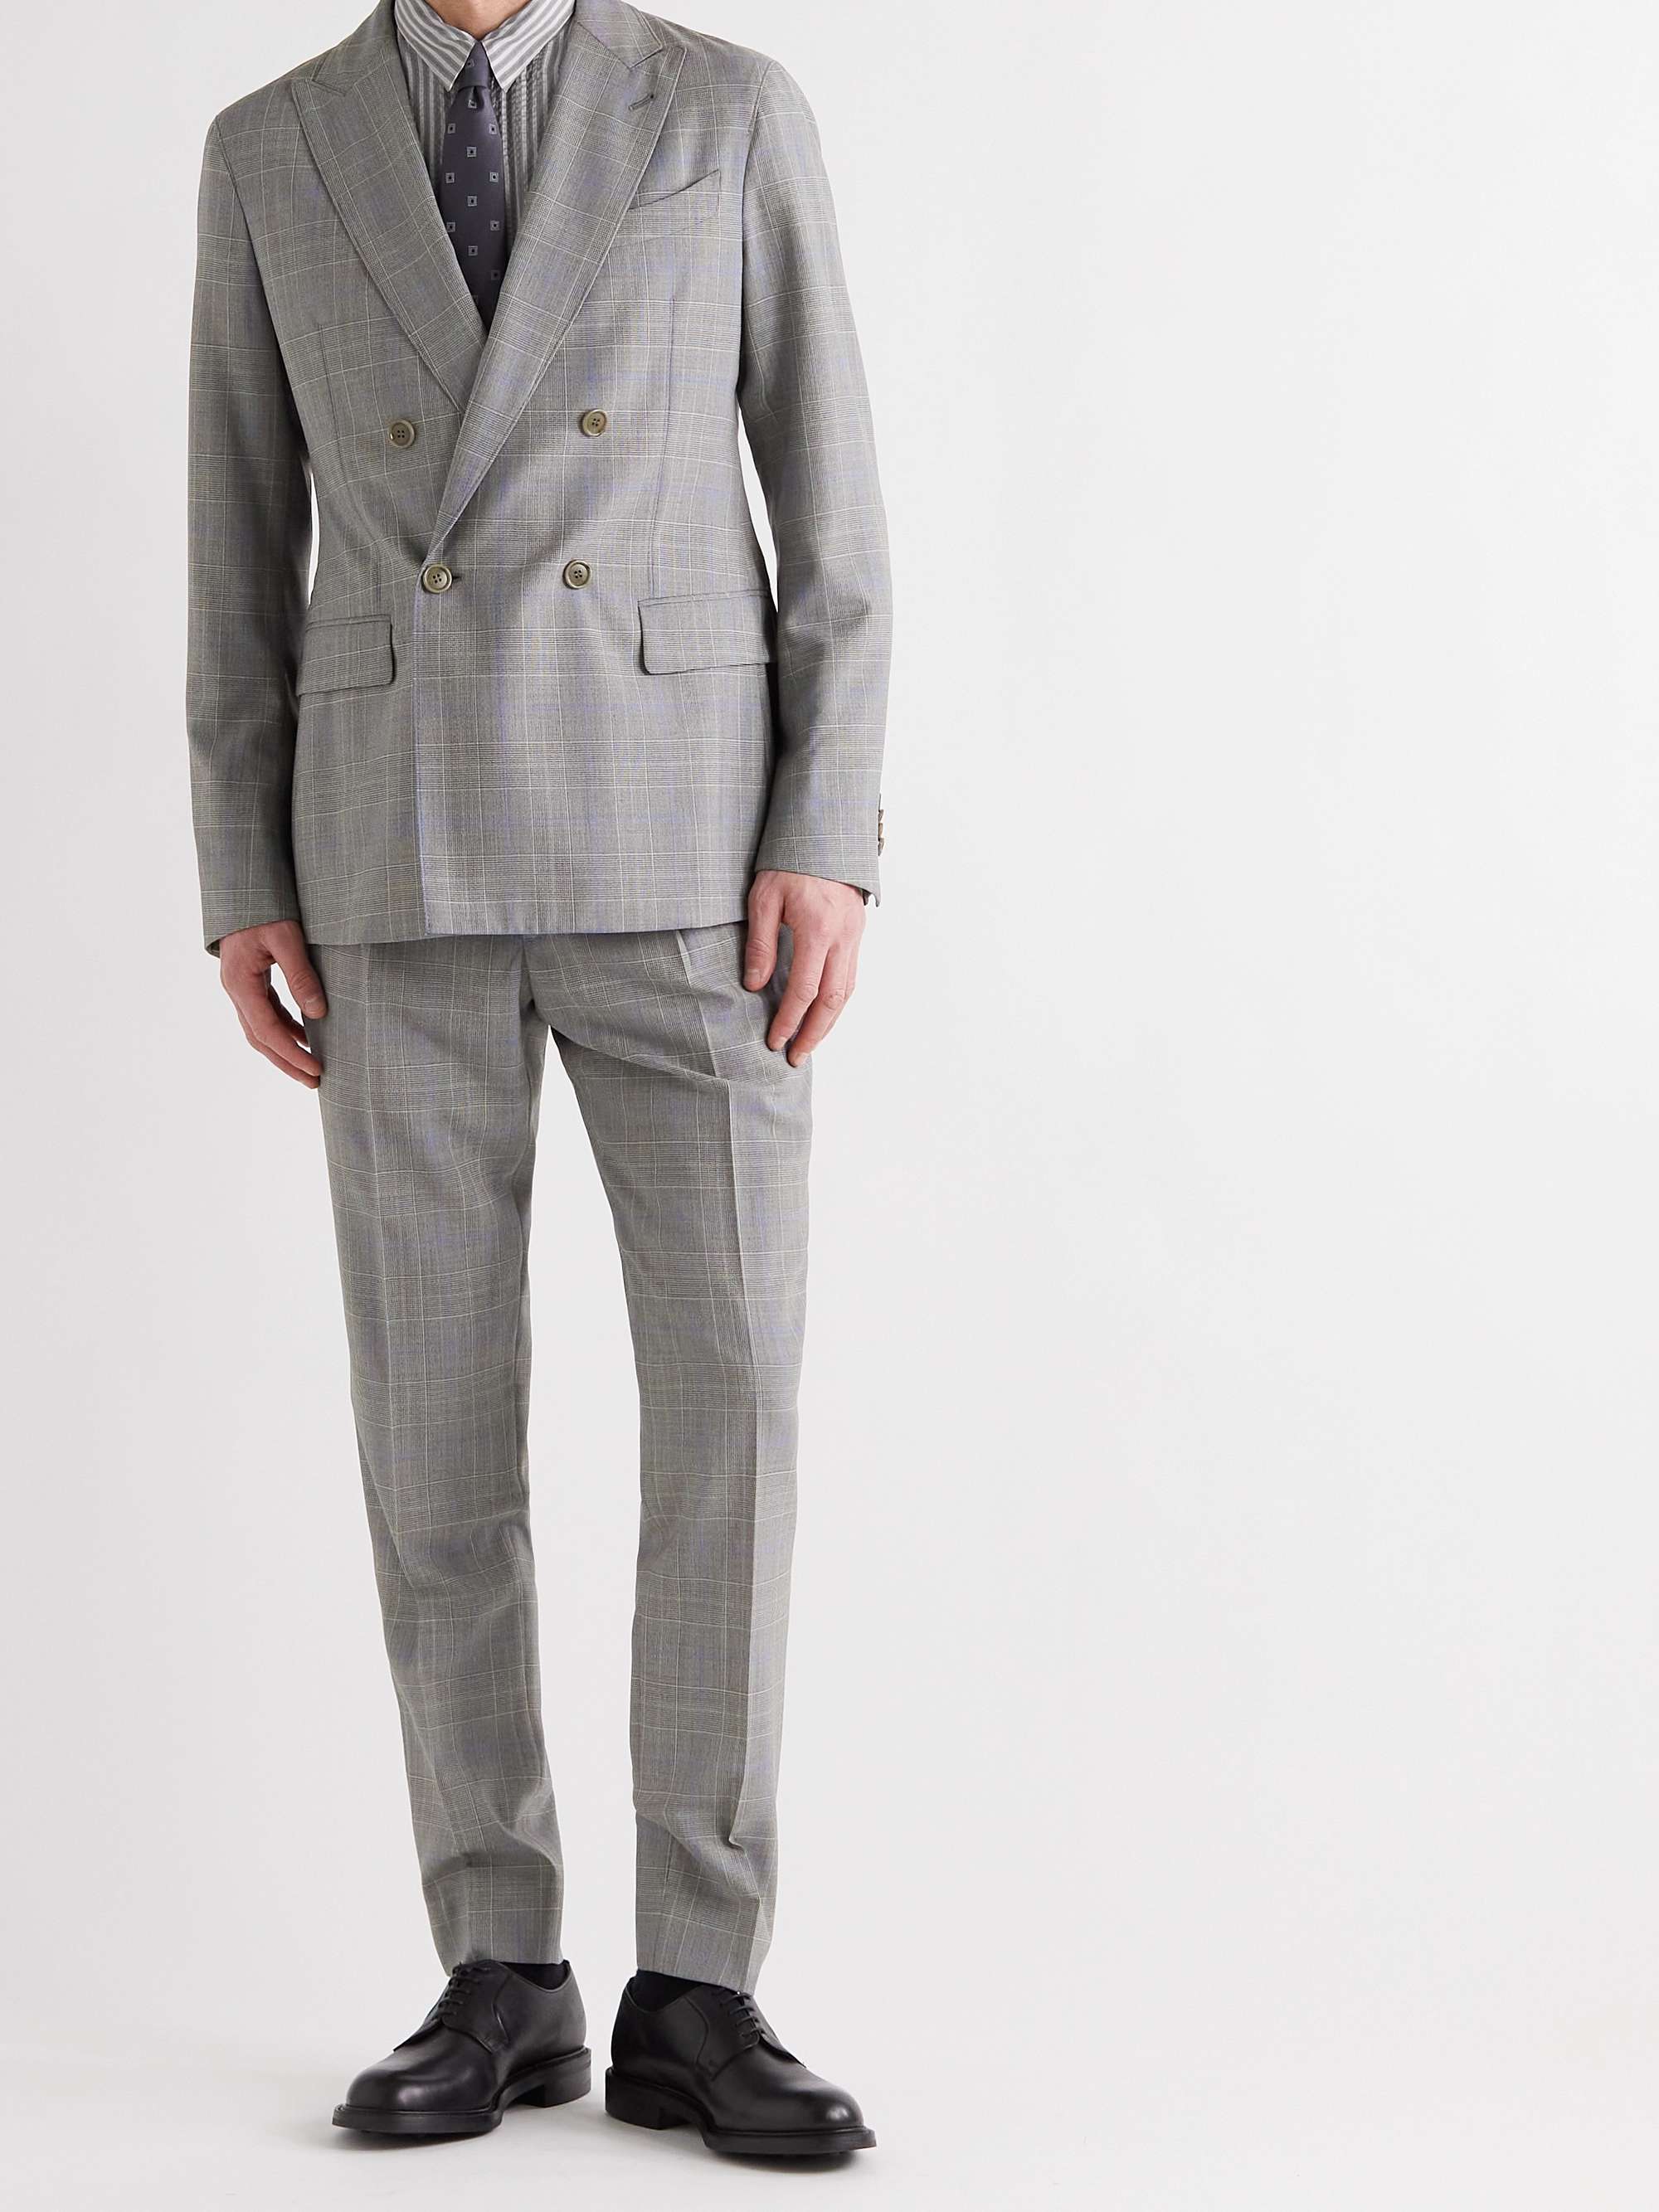 GIORGIO ARMANI Slim-Fit Double-Breasted Prince Of Wales Checked Wool Suit  Jacket for Men | MR PORTER